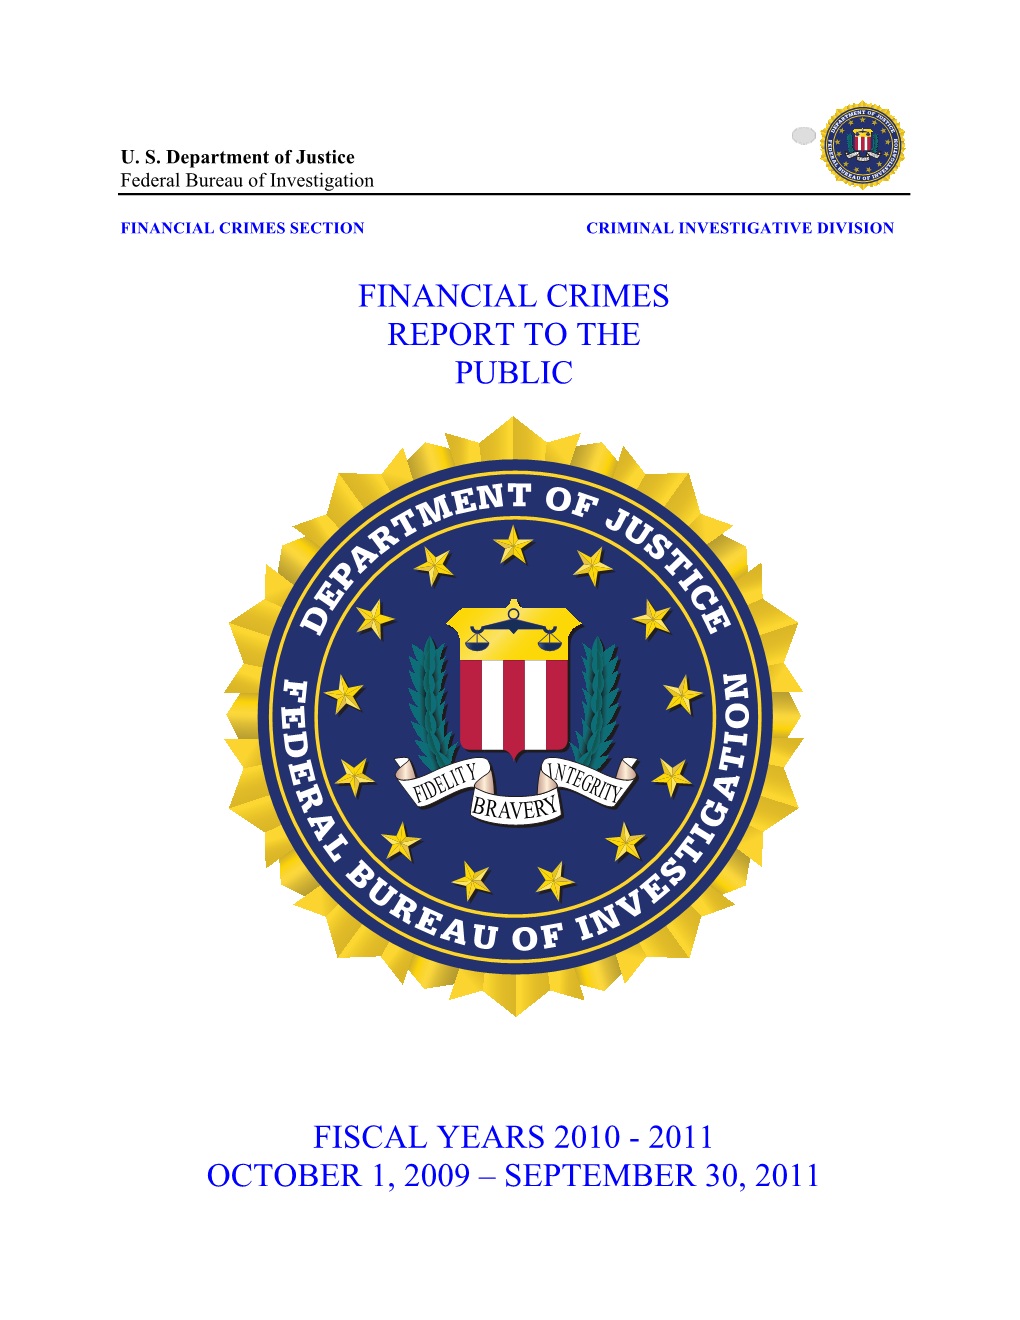 Financial Crimes Report to the Public: Fiscal Years 2010-2011